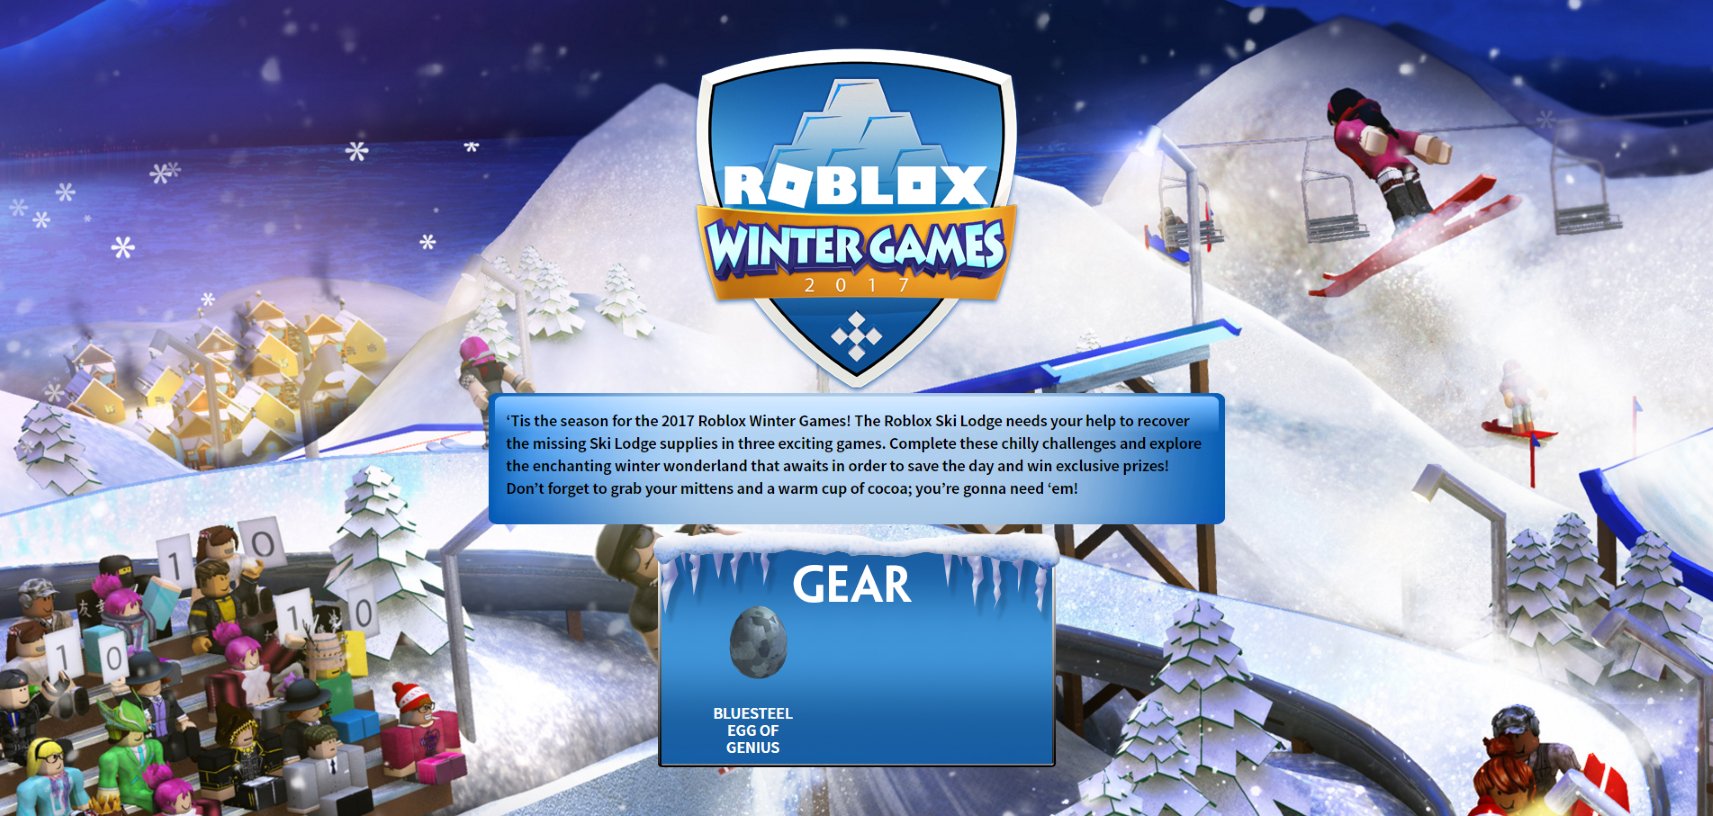 Worldblox On Twitter Roblox S Winter Games 2017 Is Coming Soon